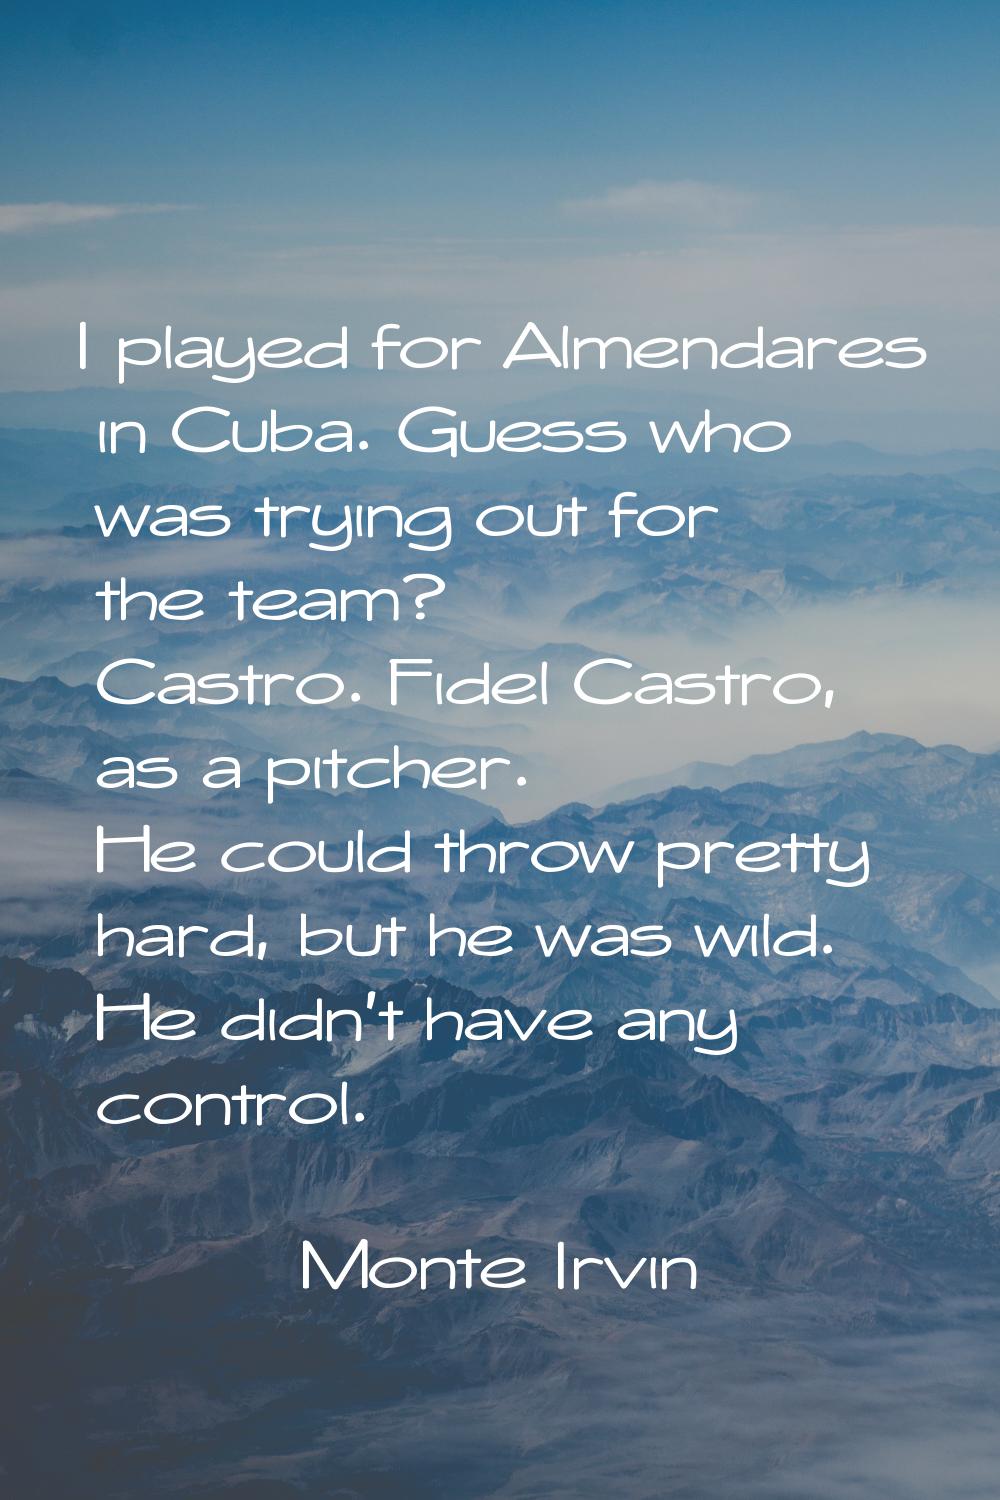 I played for Almendares in Cuba. Guess who was trying out for the team? Castro. Fidel Castro, as a 